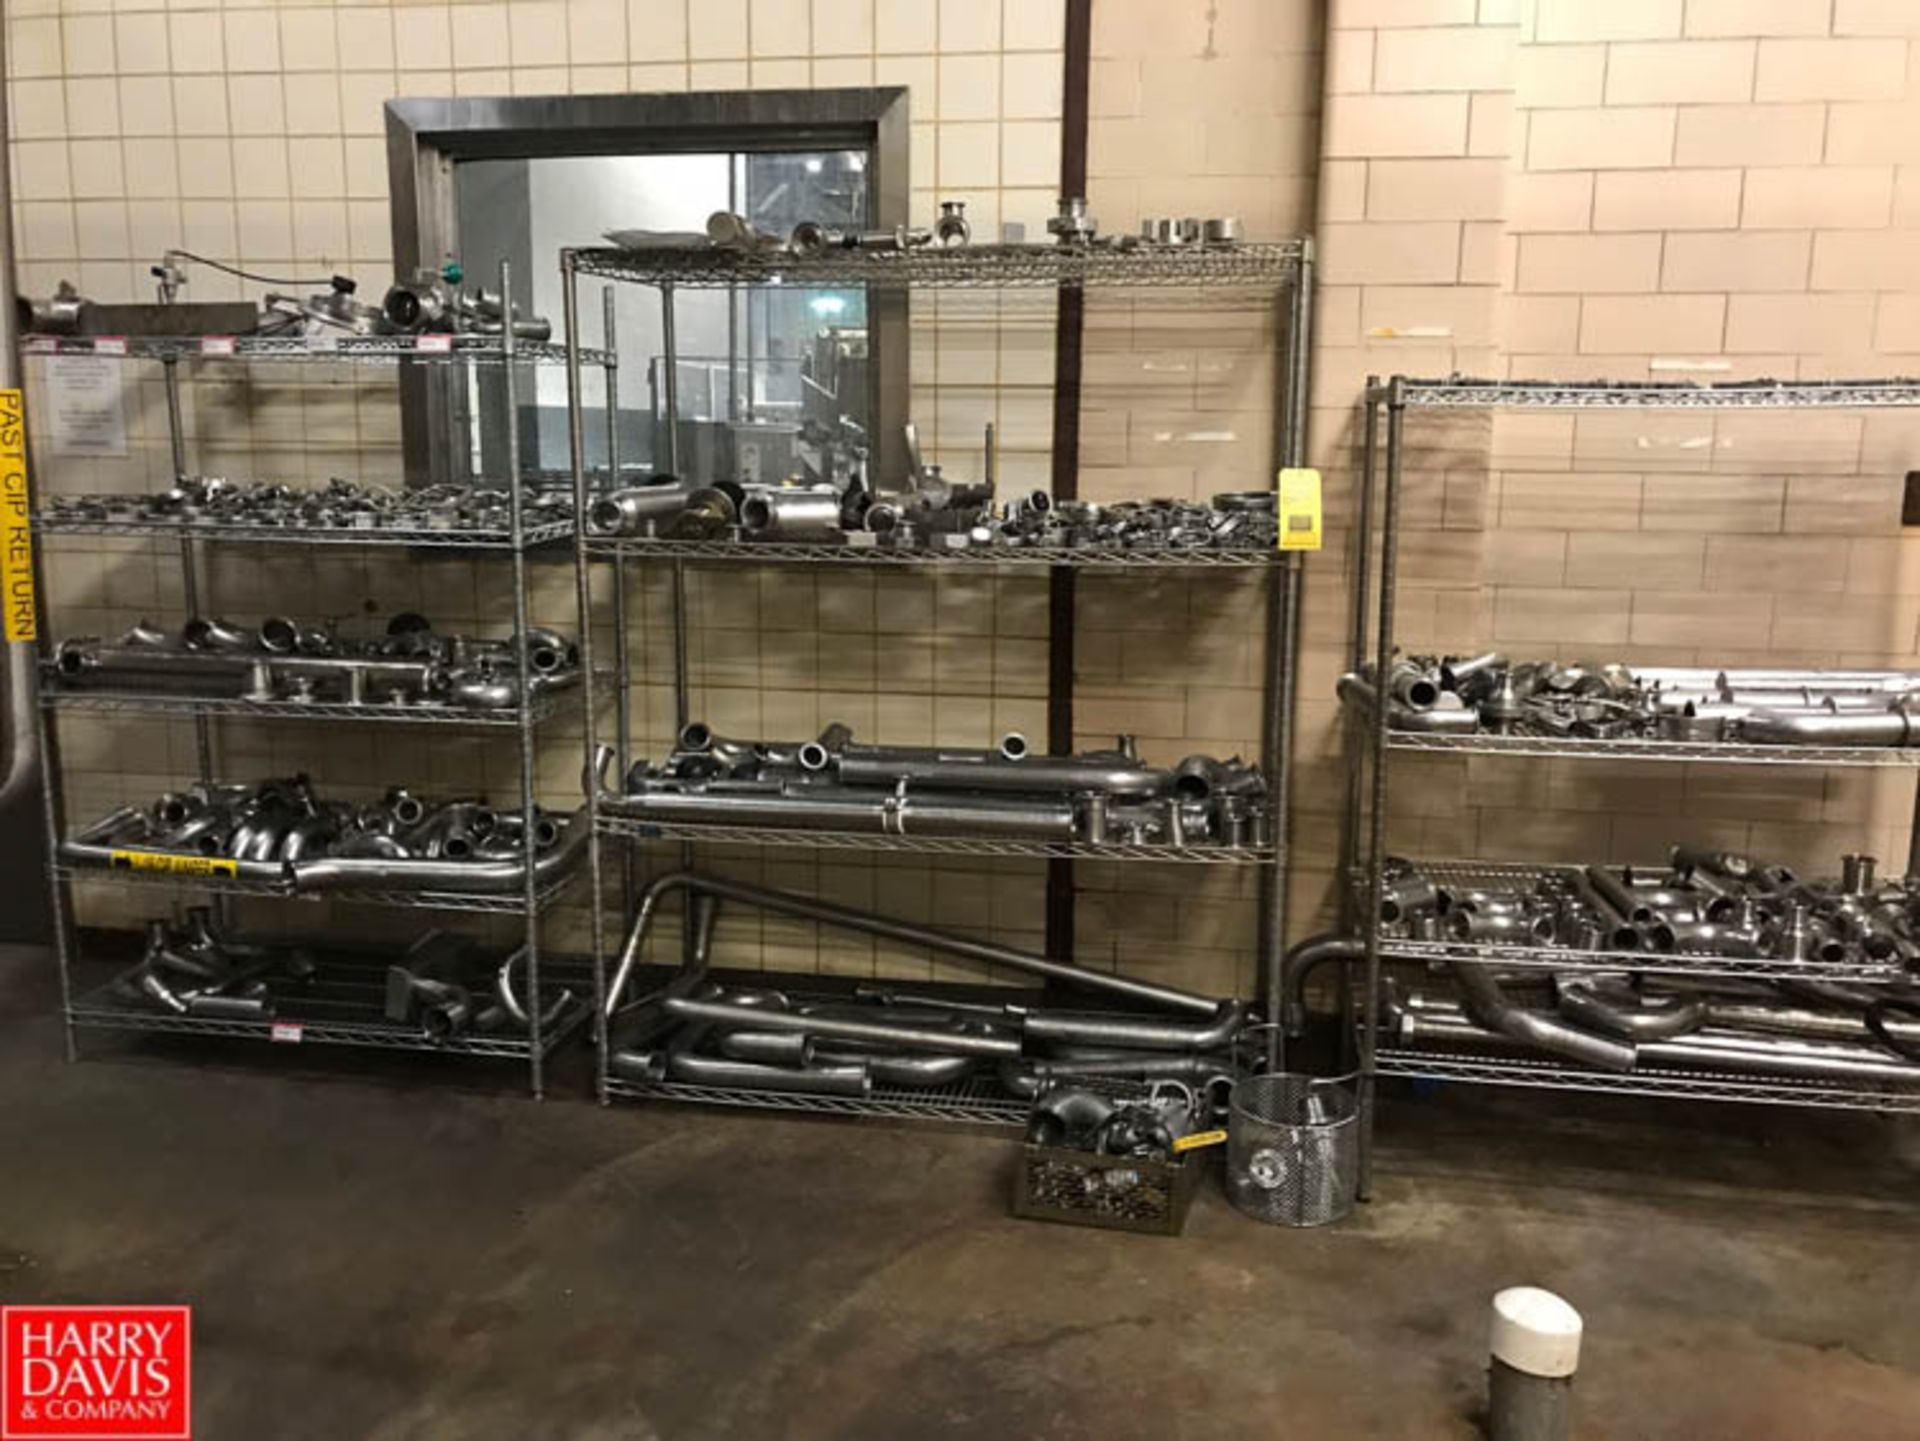 300+ Assorted S/S Clamps, Elbows, Connectors, Check Valves, and more with Racks